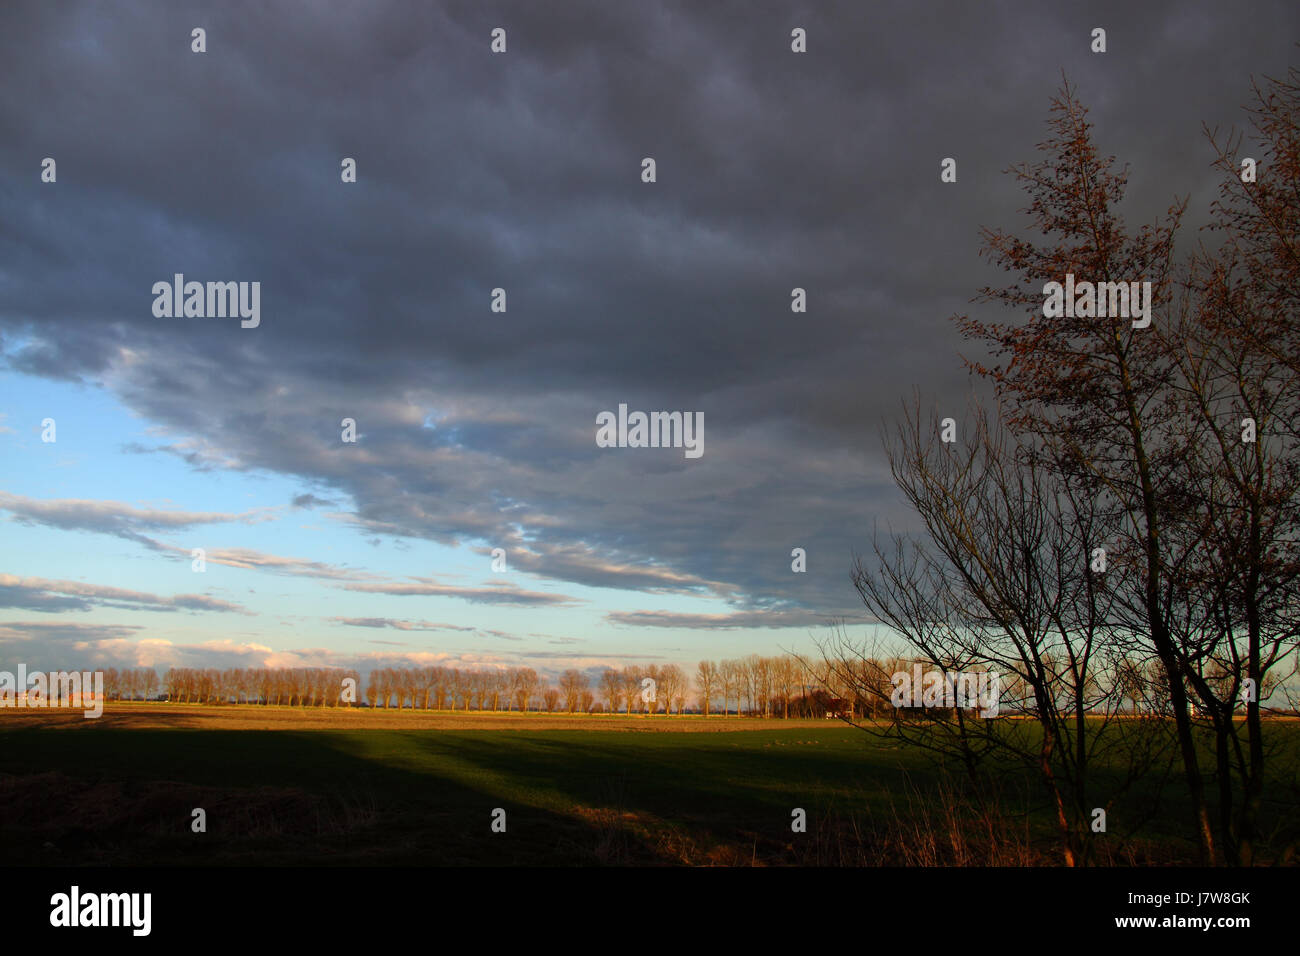 tree trees field acre firmament sky clouds weather shine shines bright lucent Stock Photo